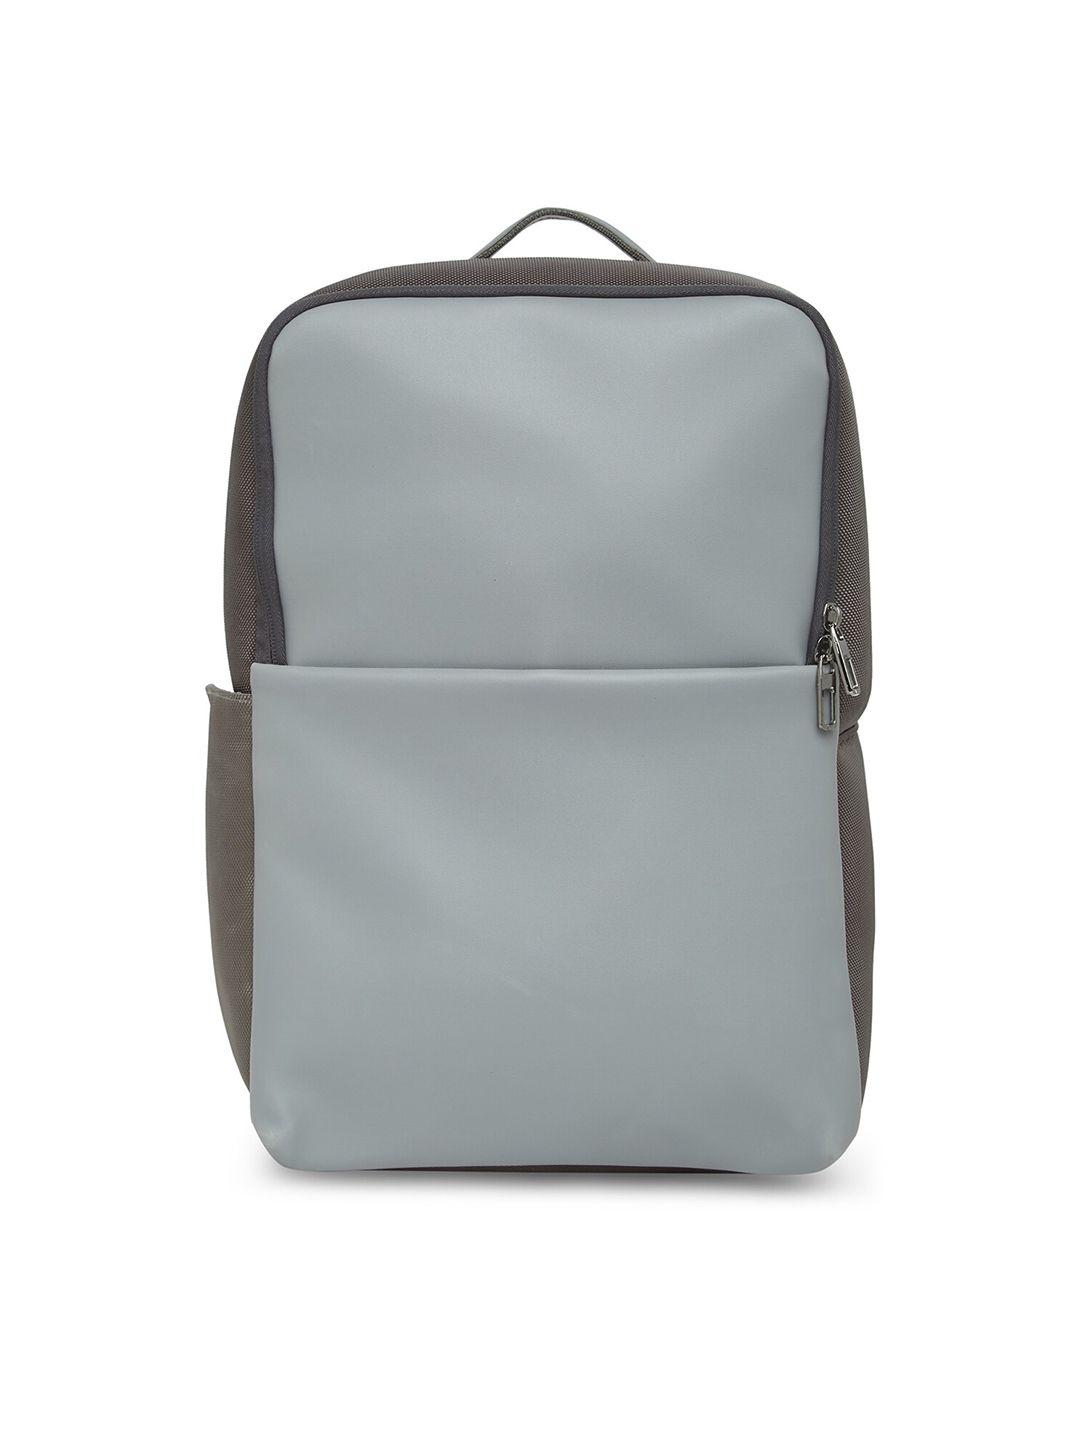 mboss unisex grey solid backpack